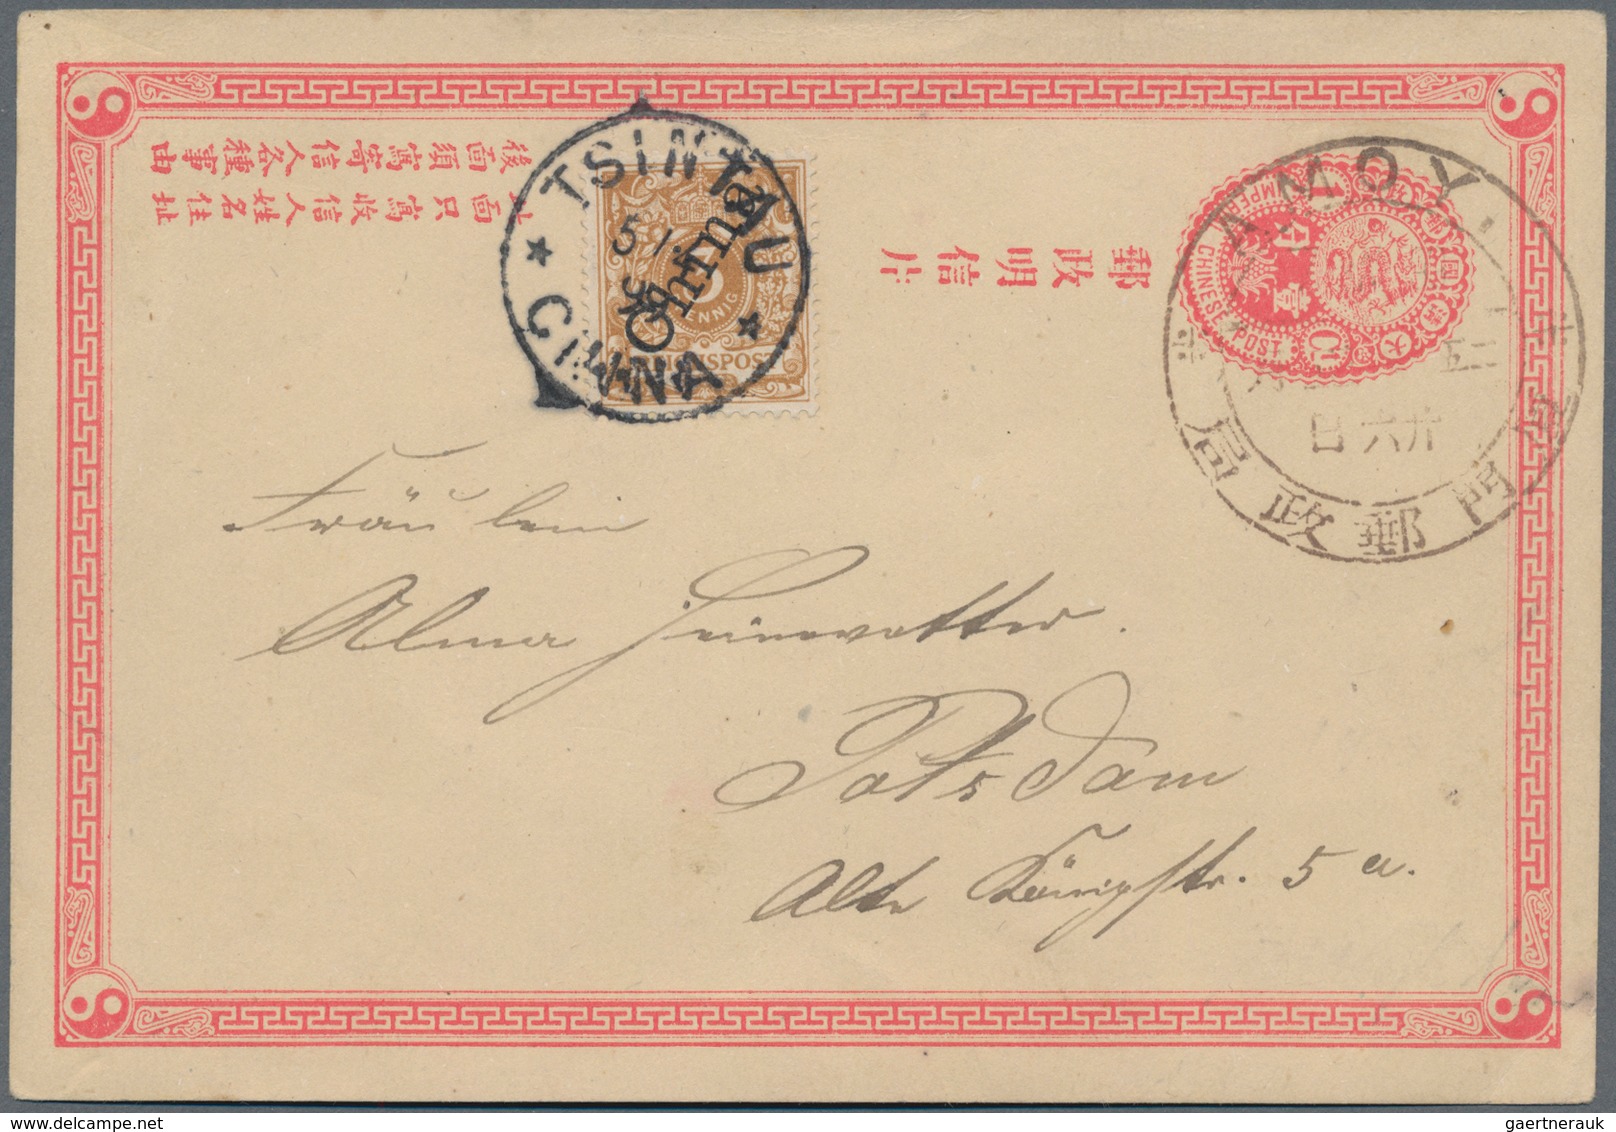 China - Ganzsachen: 1897, Card ICP 1 C. Canc. Large Dollar "AMOY", Form Use With German Offices 3 Pf - Cartes Postales